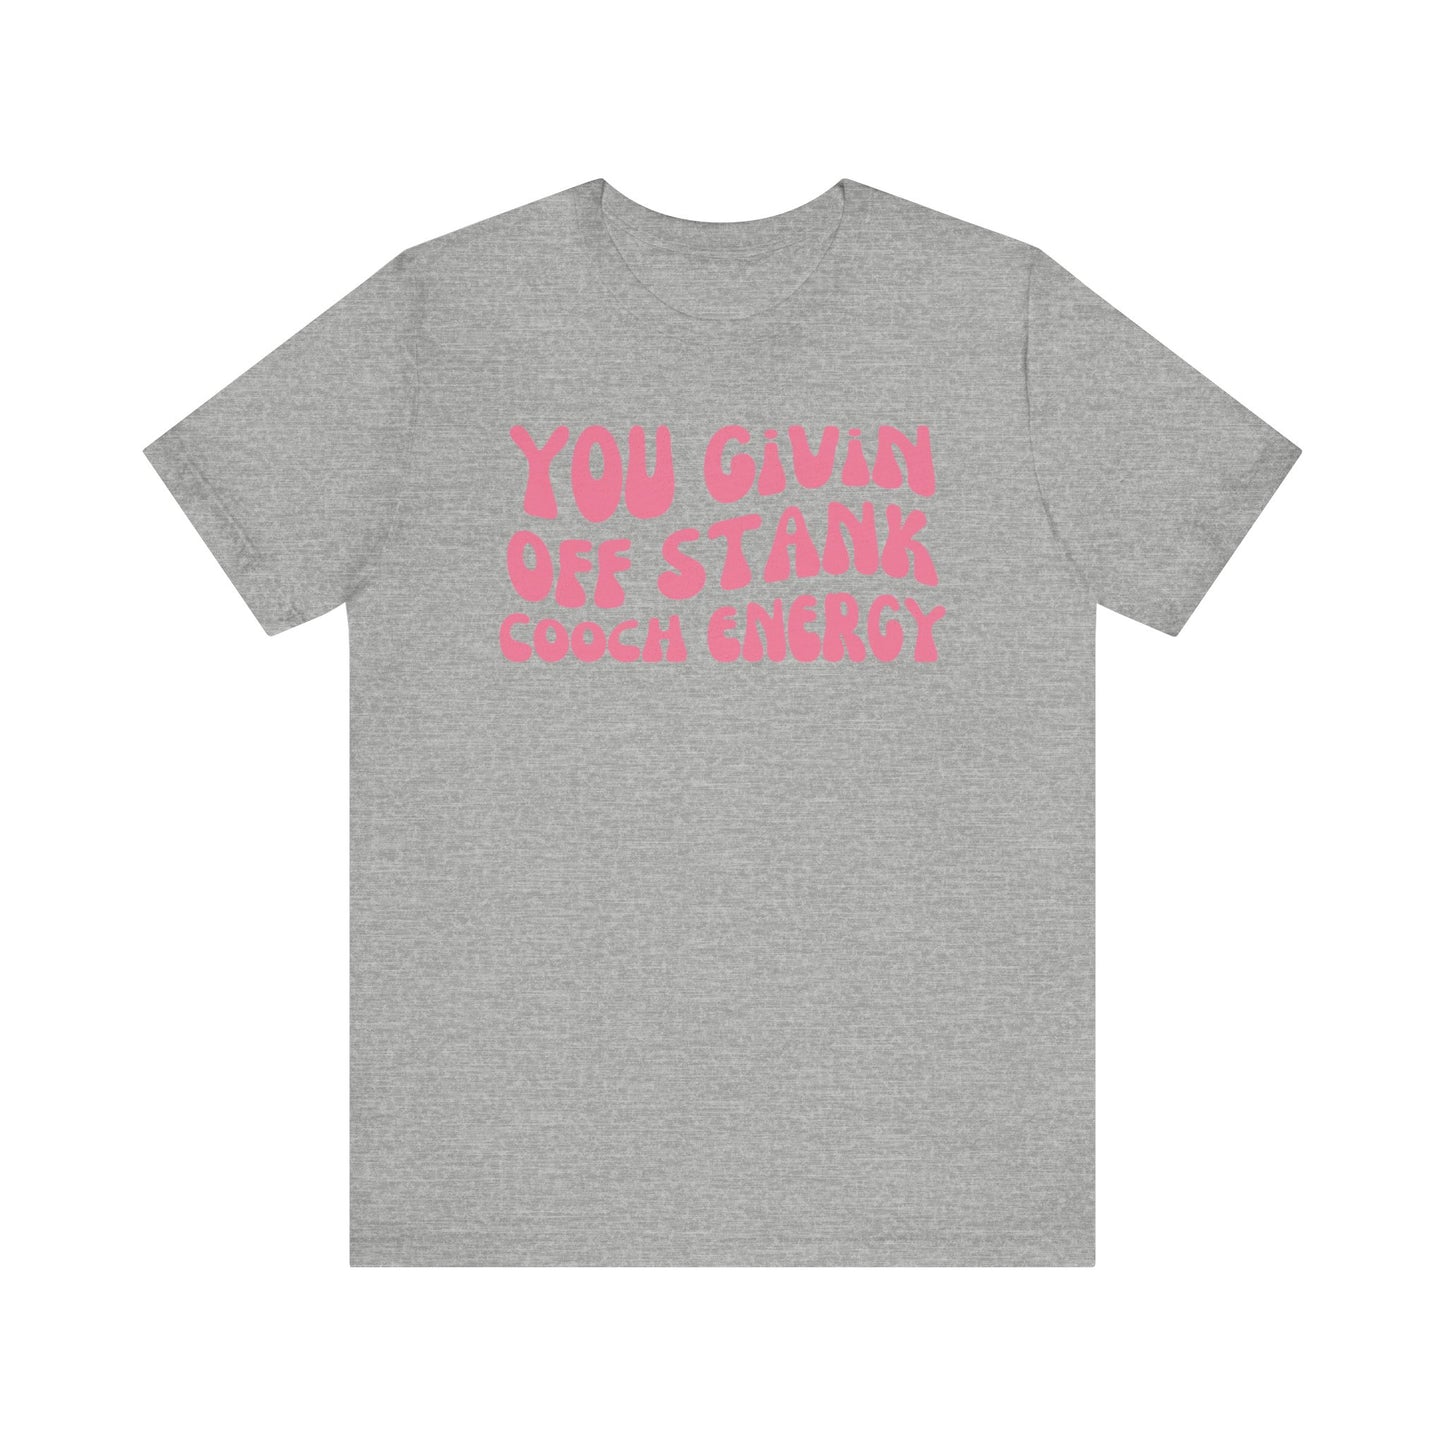 You Givin Off Stank Cooch Energy - Pink Font T-Shirt